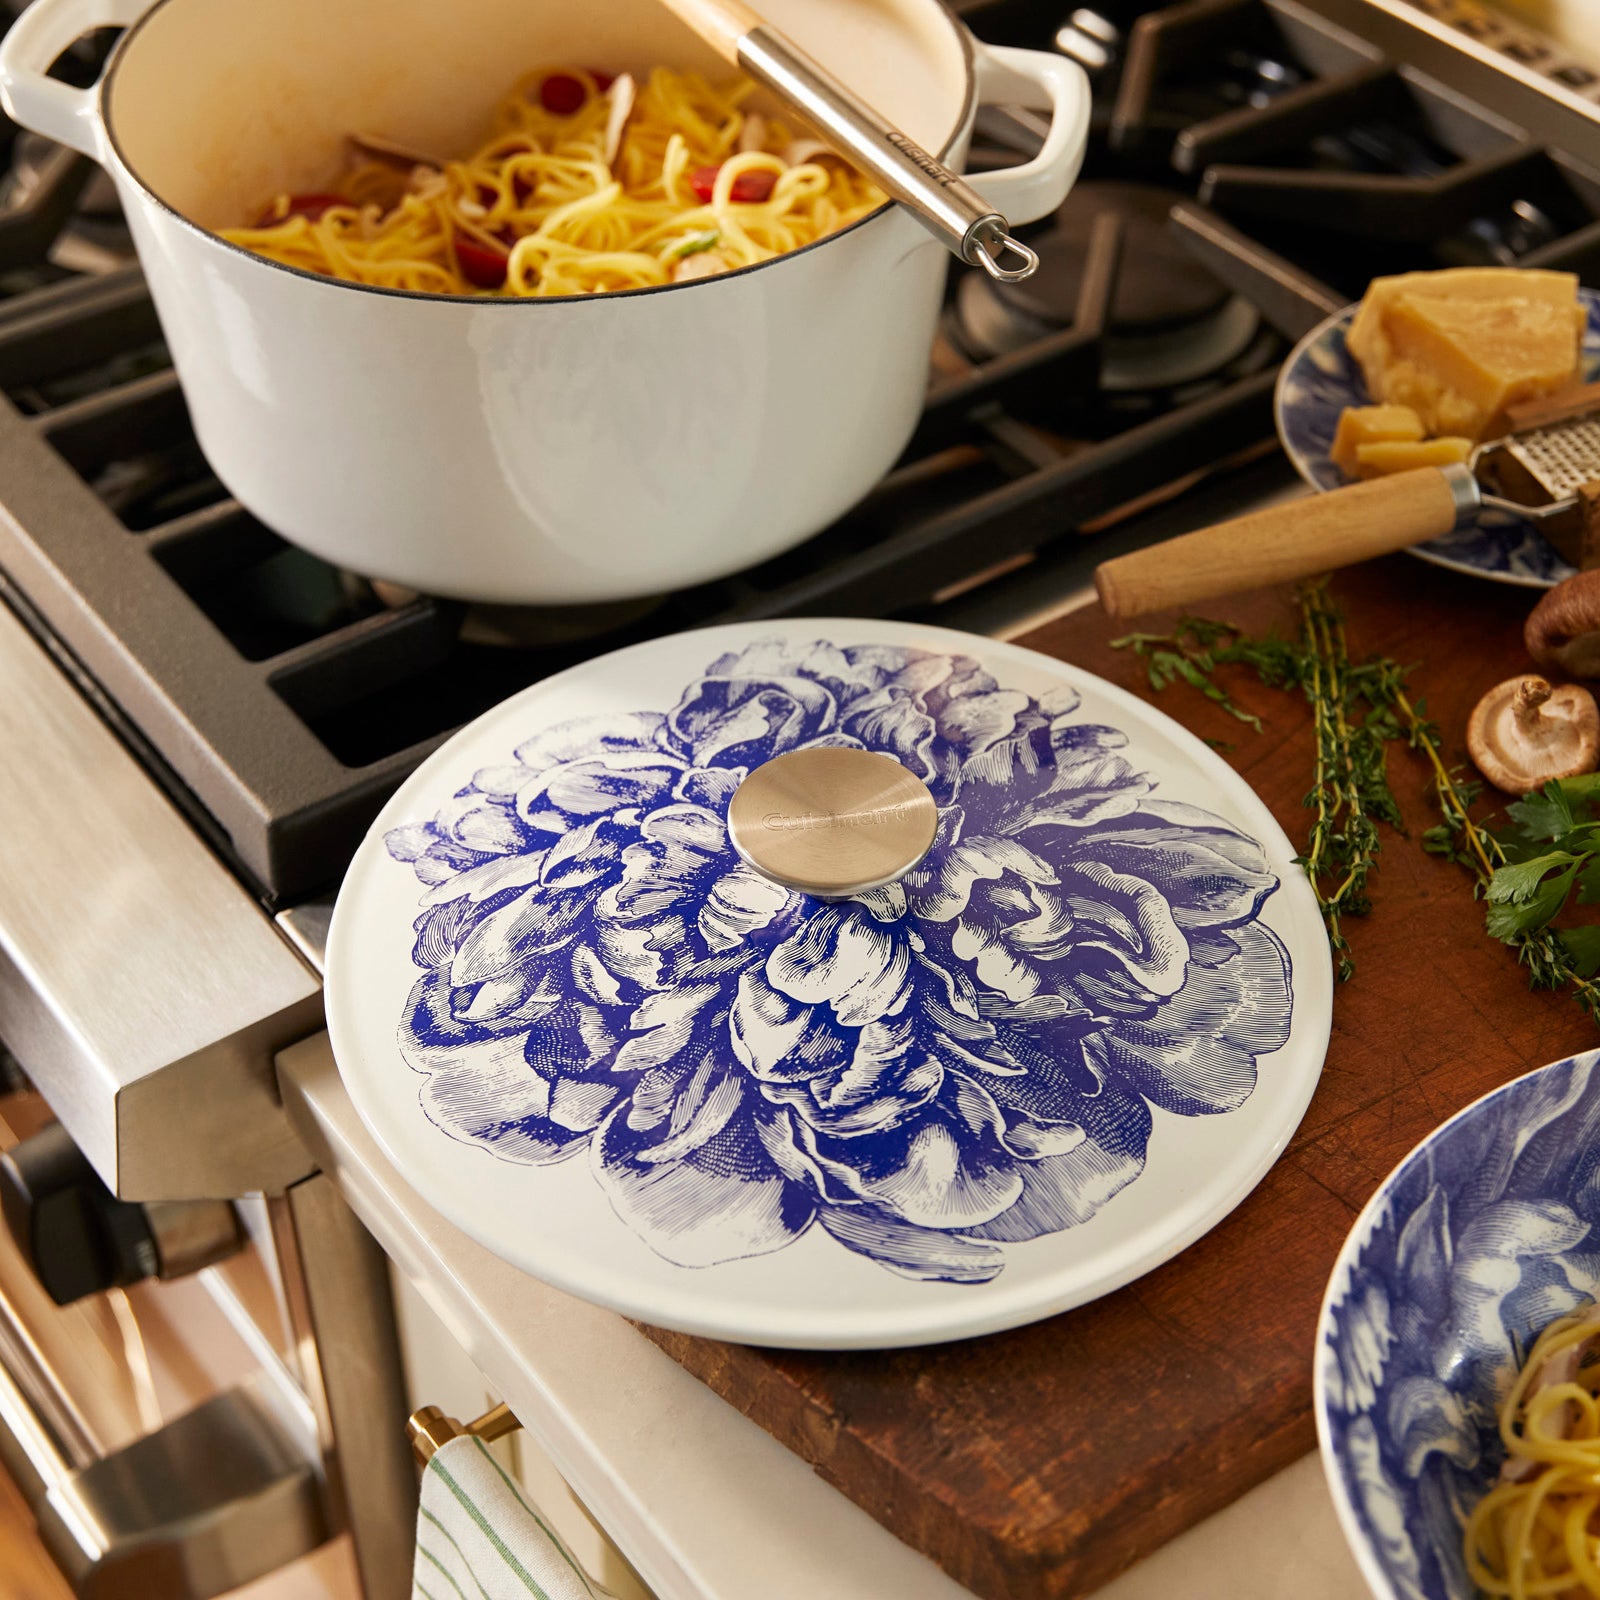 Peony Cast Iron 5 Wt. Round Casserole with Lid from the Caskata X Cuisinart Limited Edition Collection